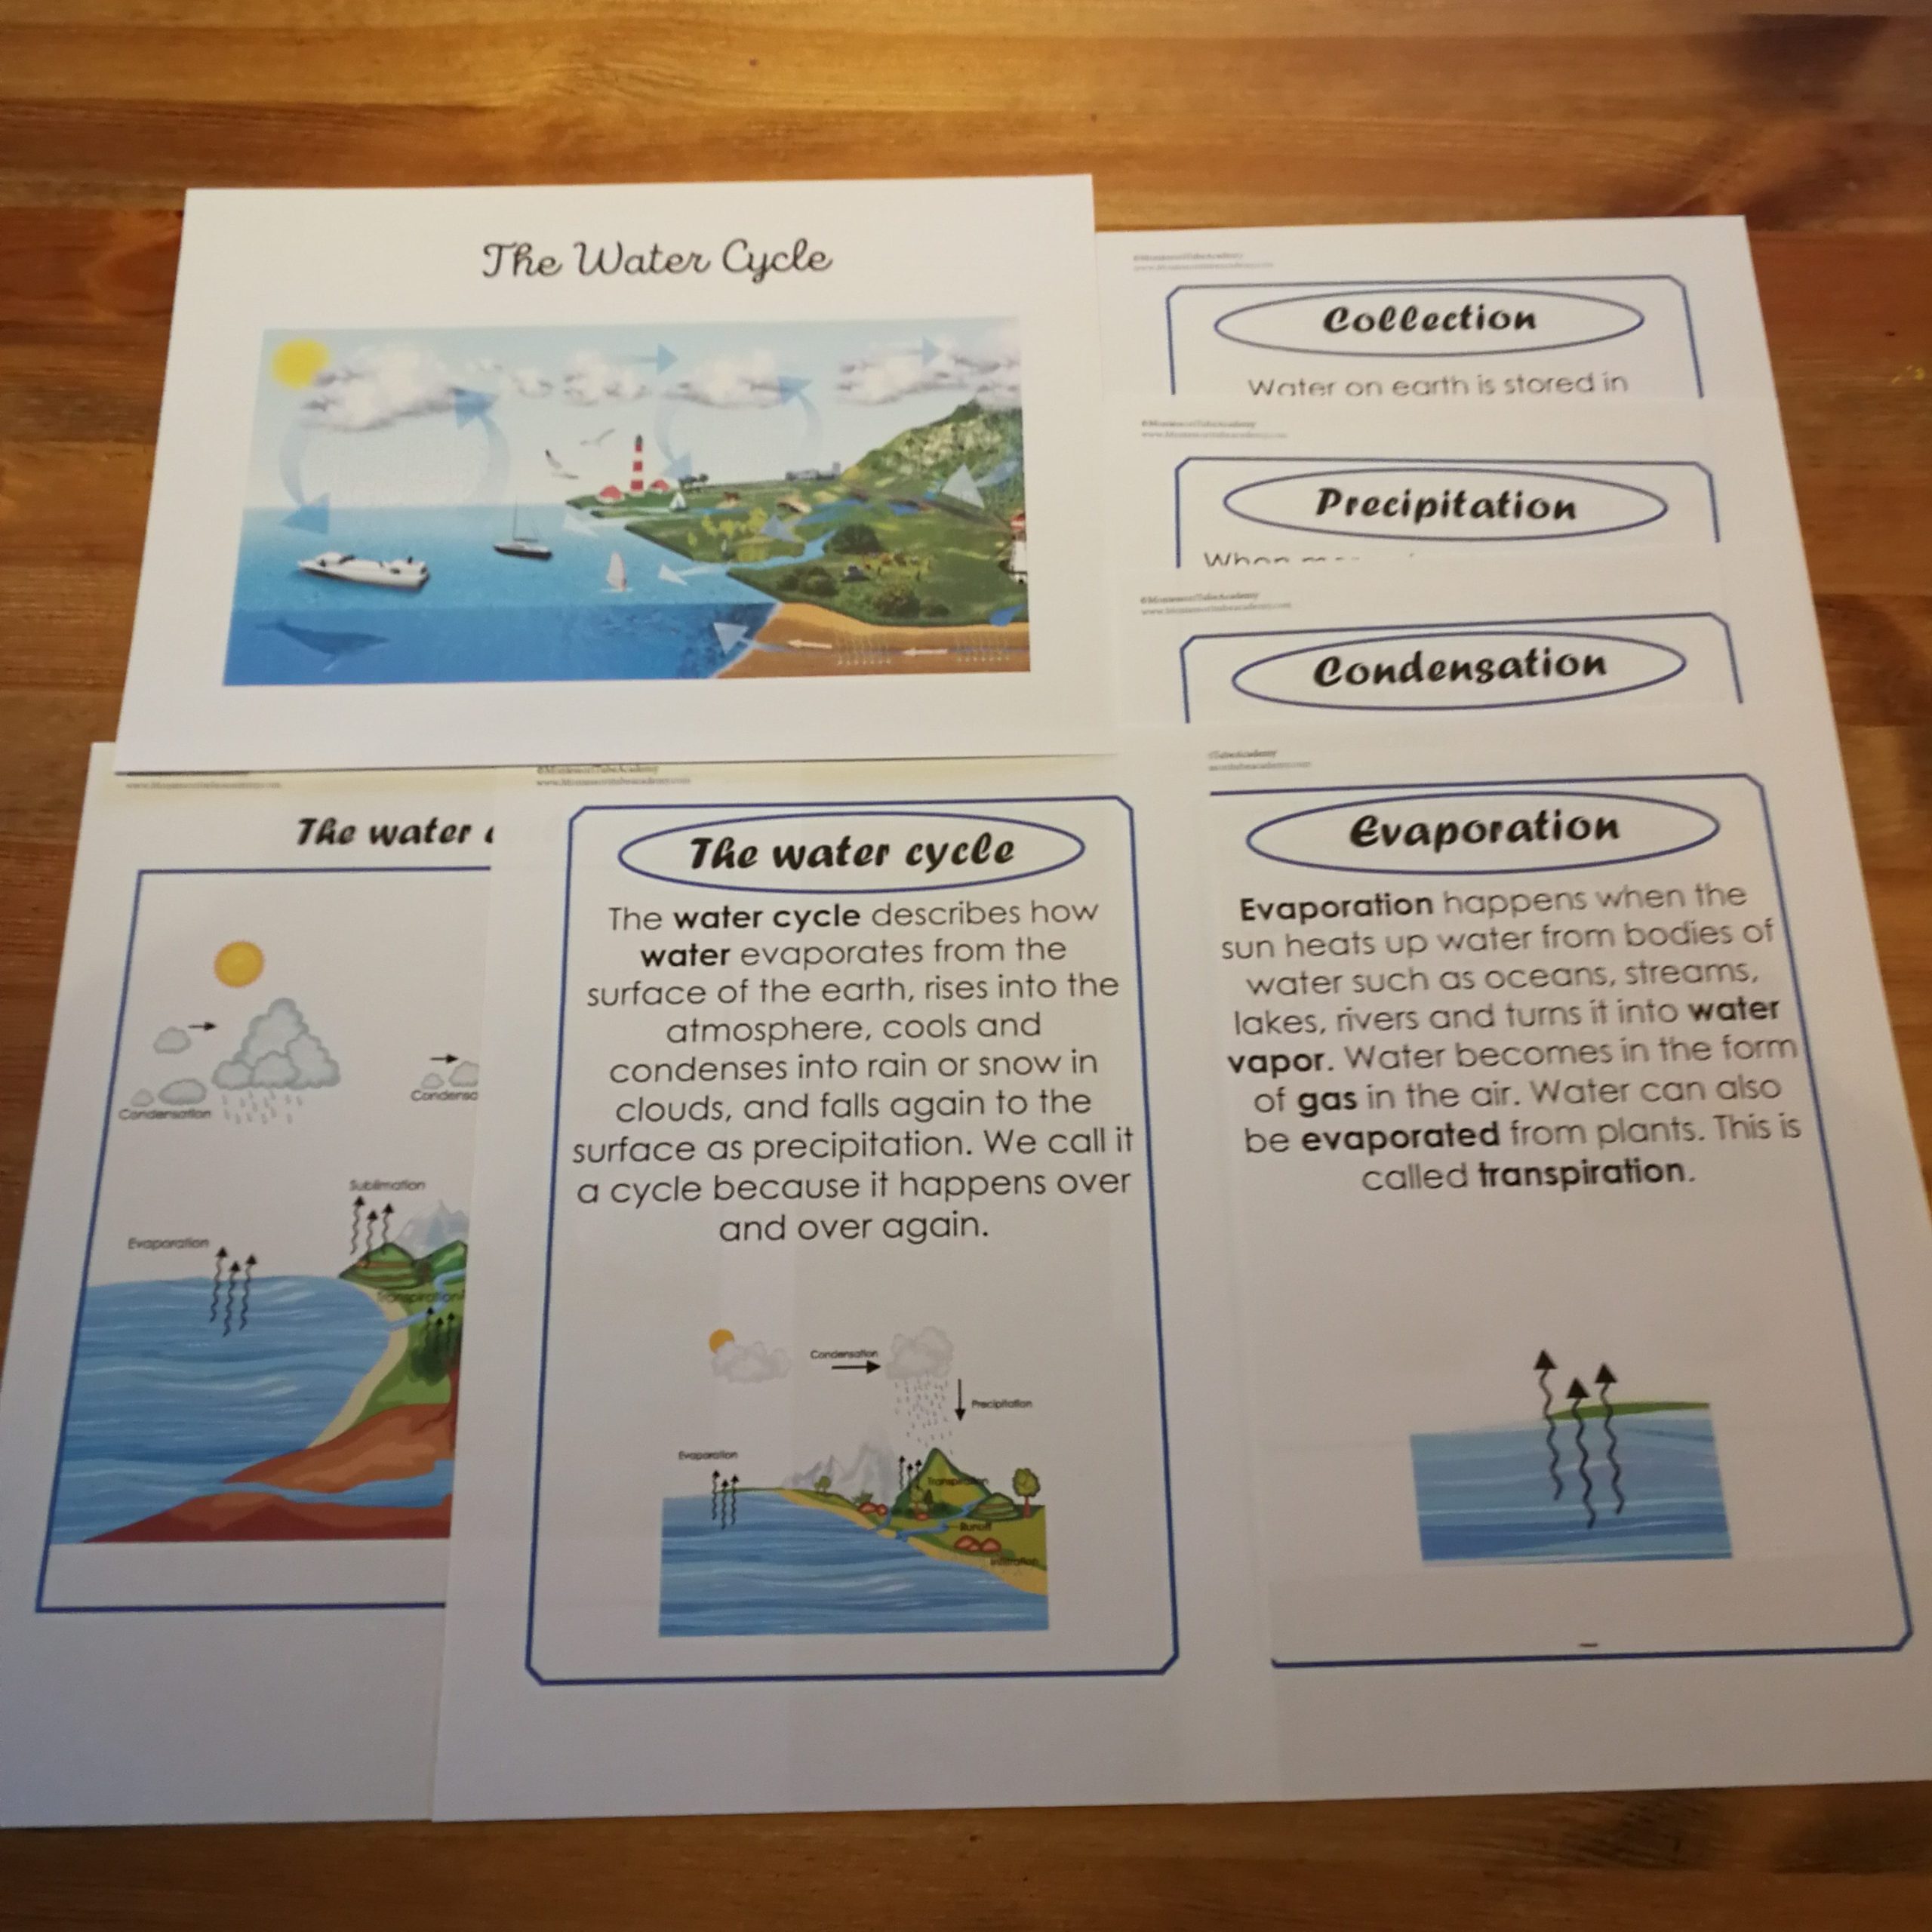 Pages outlining the water cycle laid out on a table